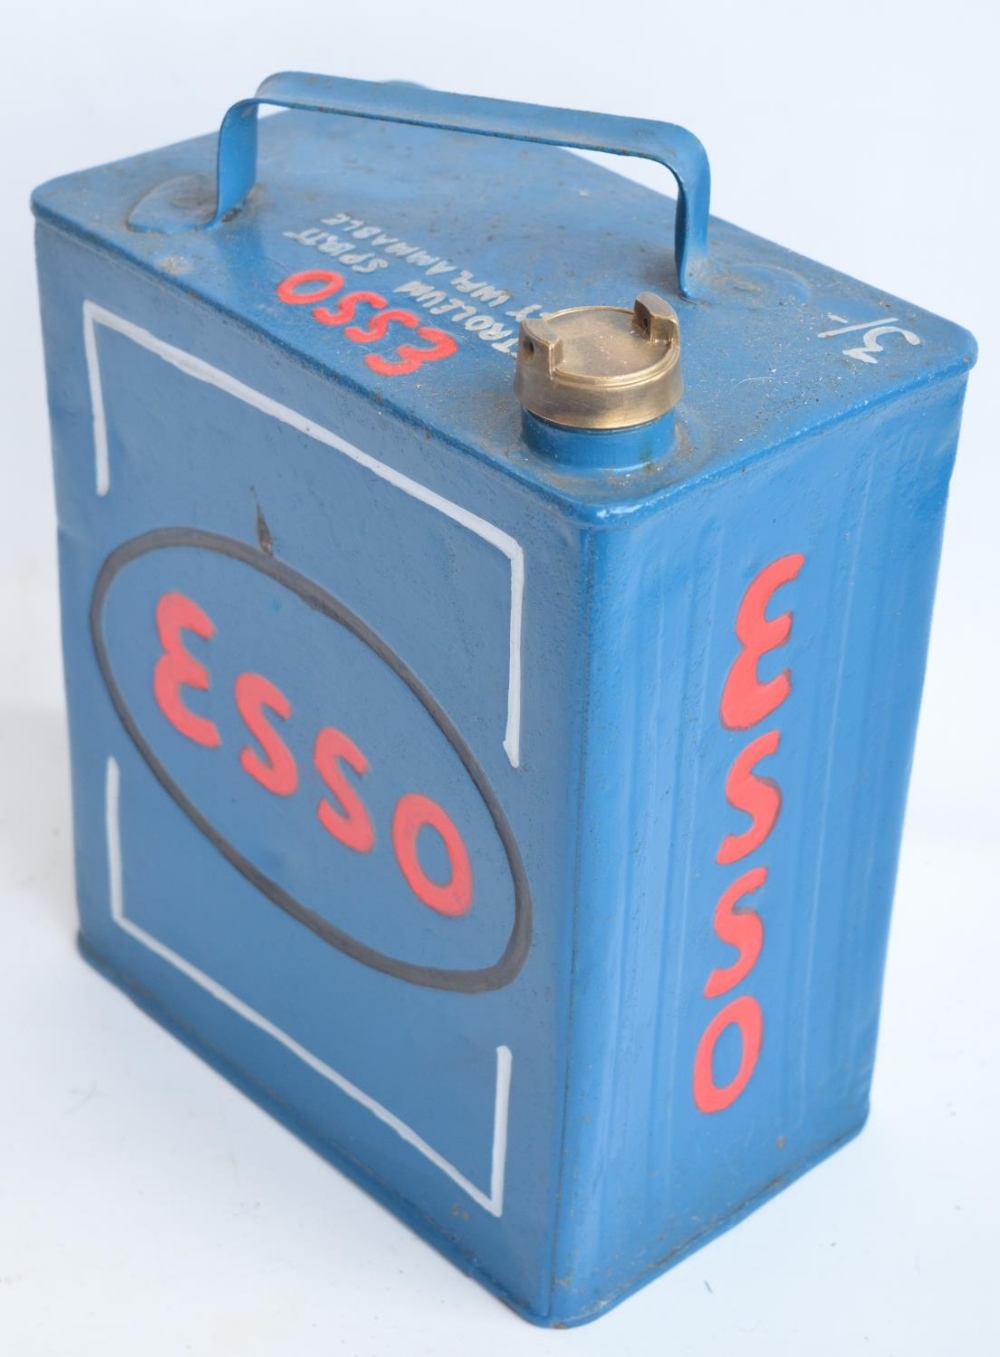 Vintage Esso 2 gallon petrol can with cap, repainted/restored in dark blue with red lettering - Image 3 of 4